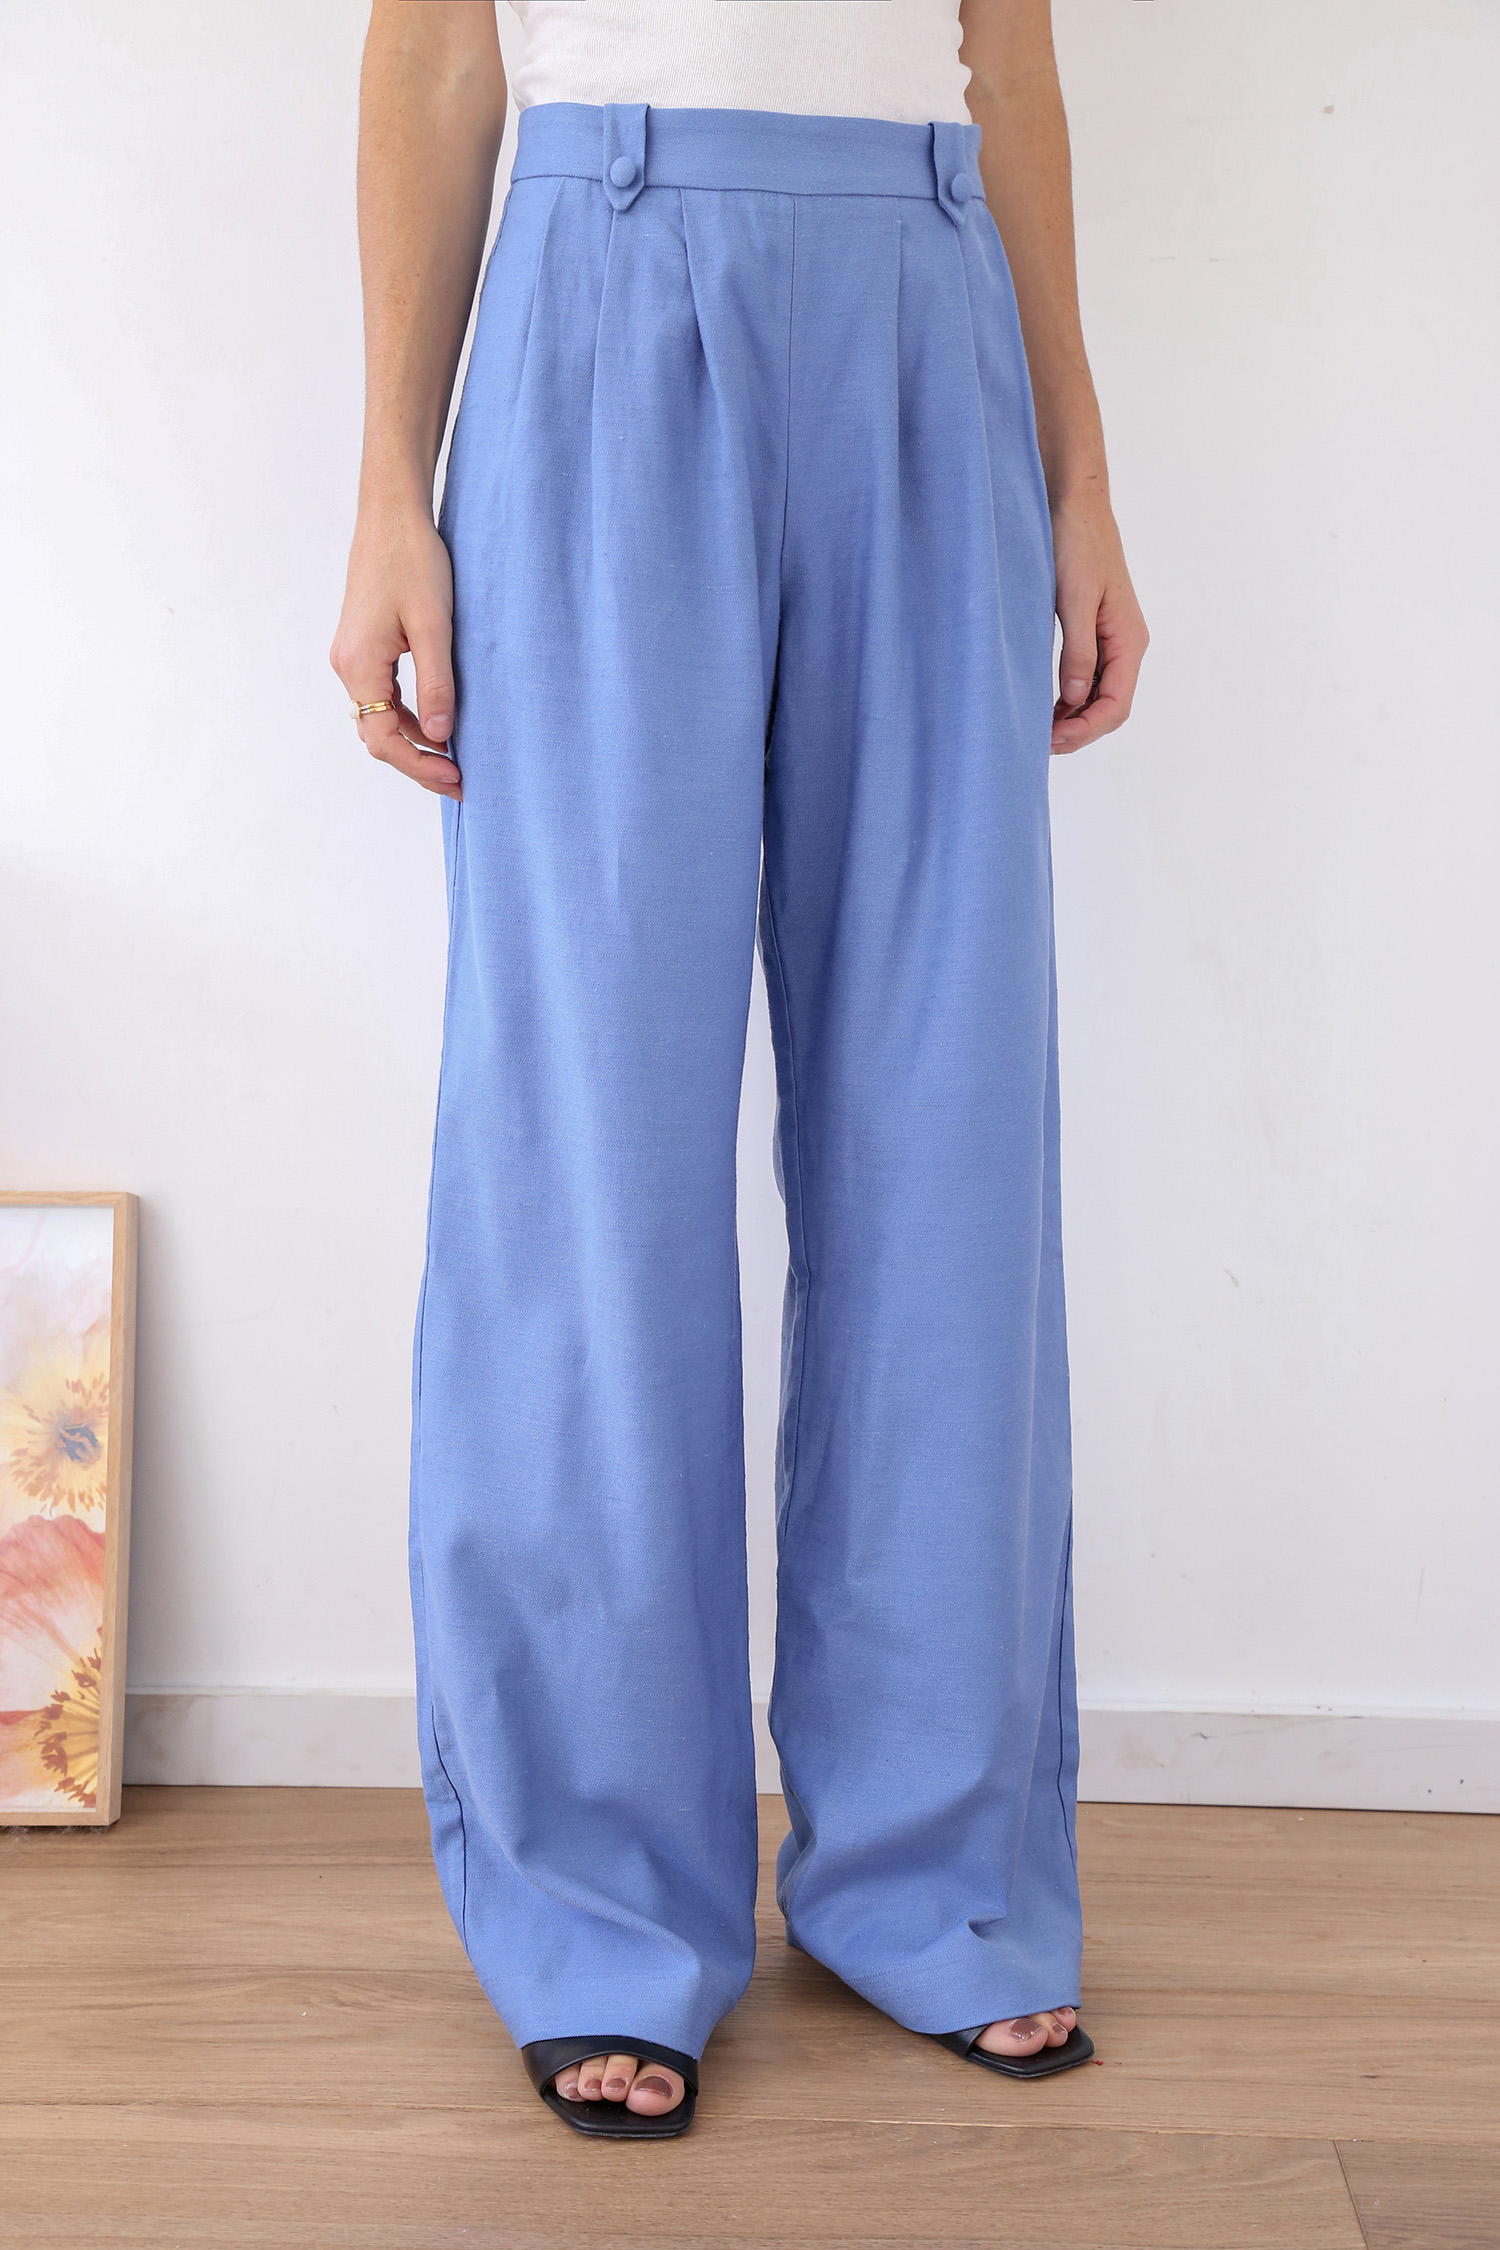 Sezane Loulou Trousers review in vintage blue